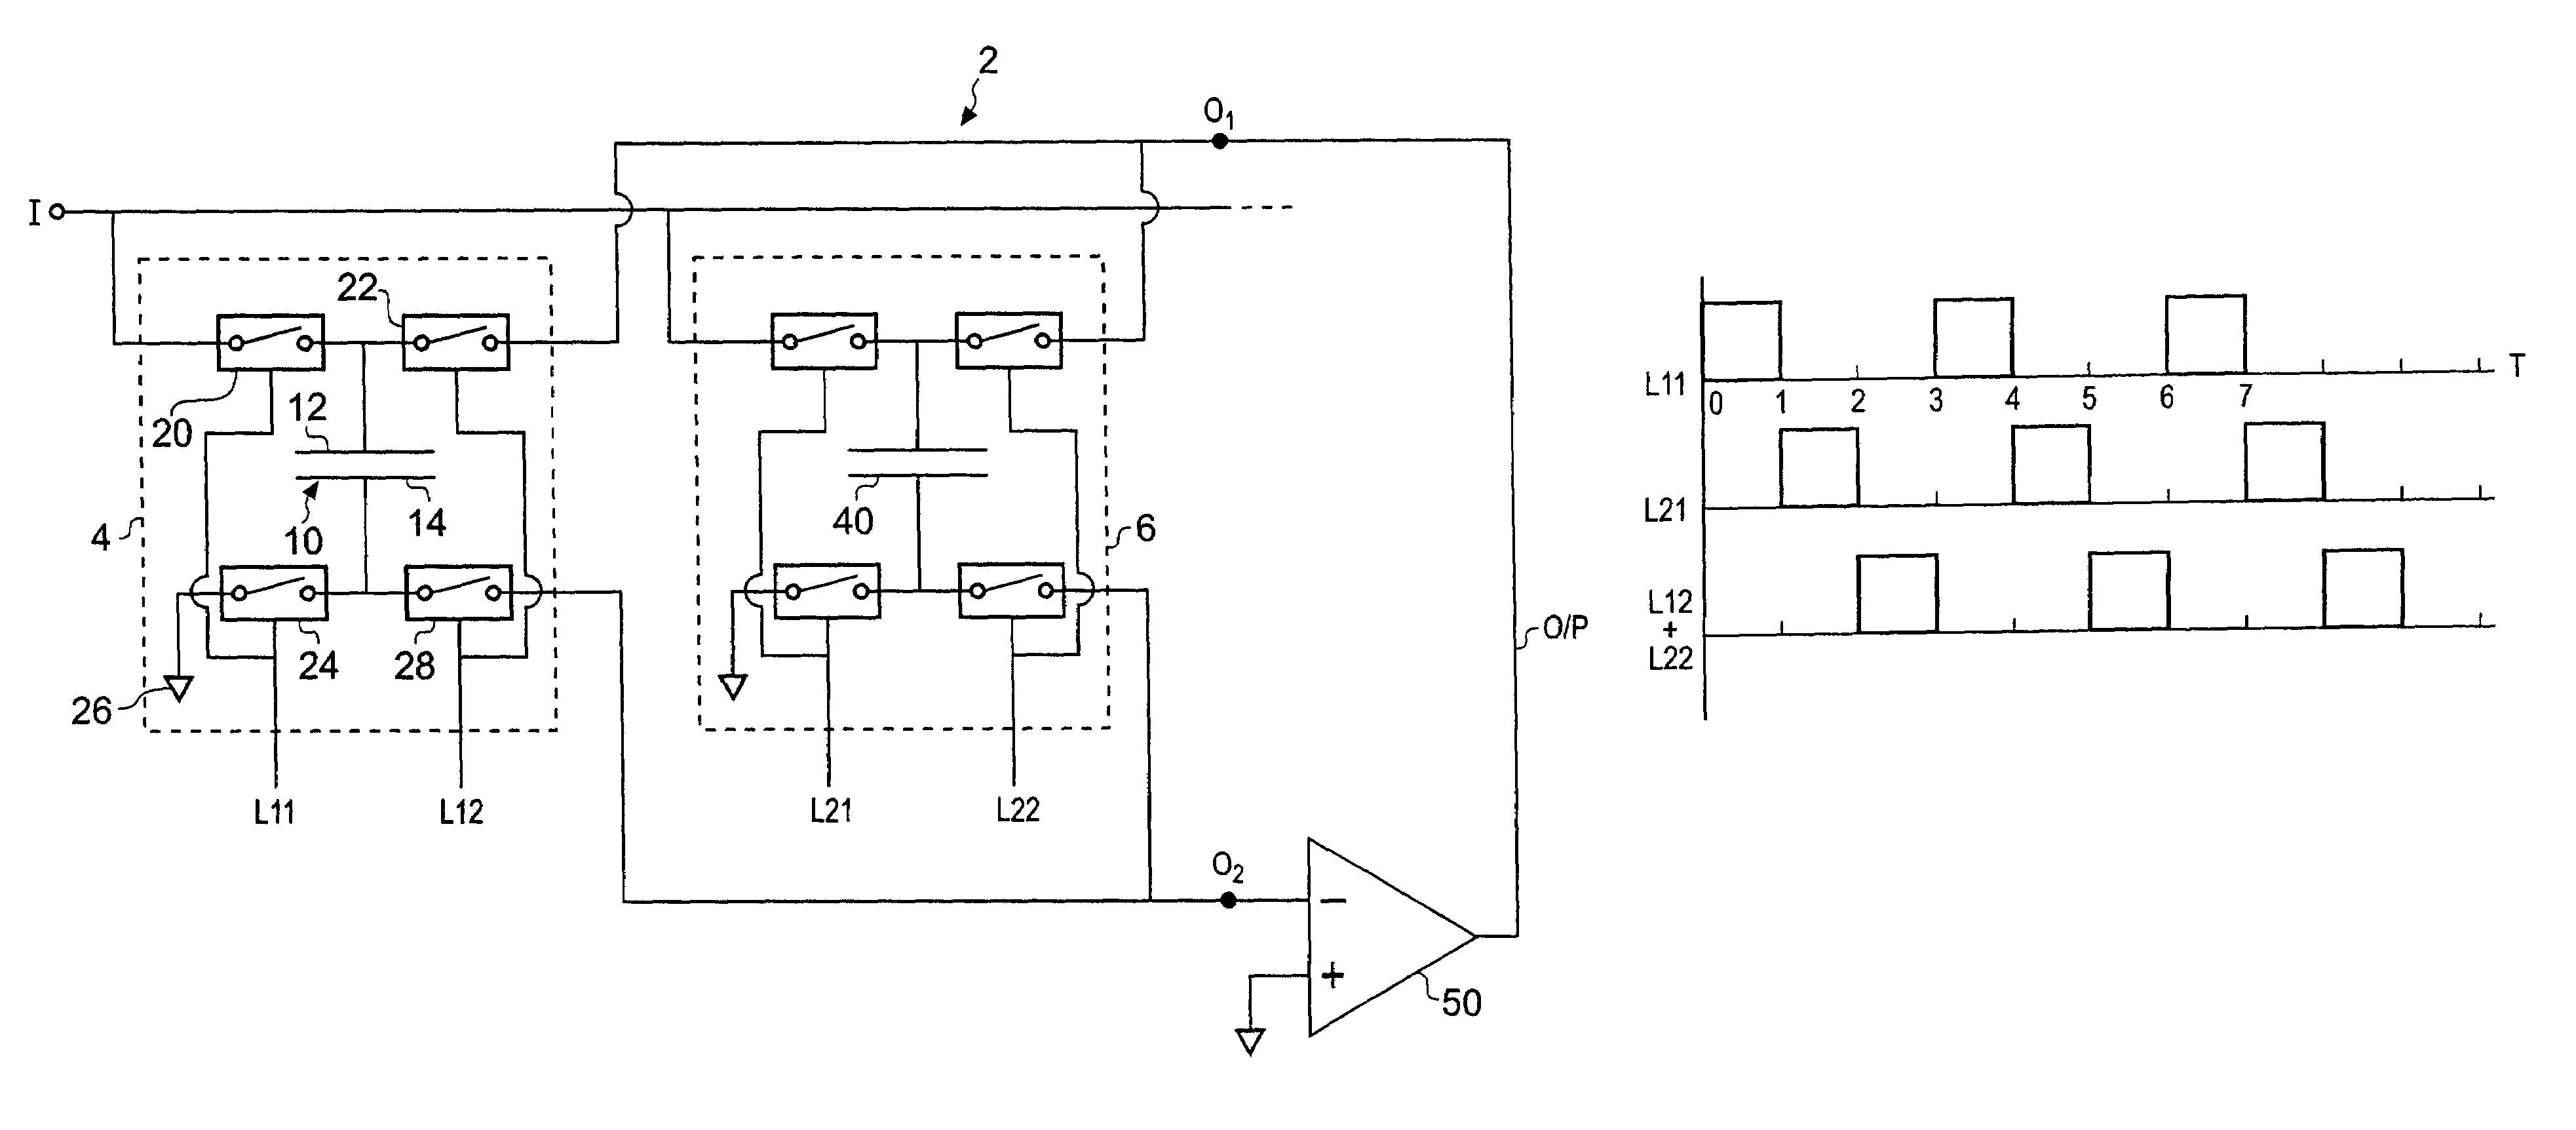 Sample and hold apparatus